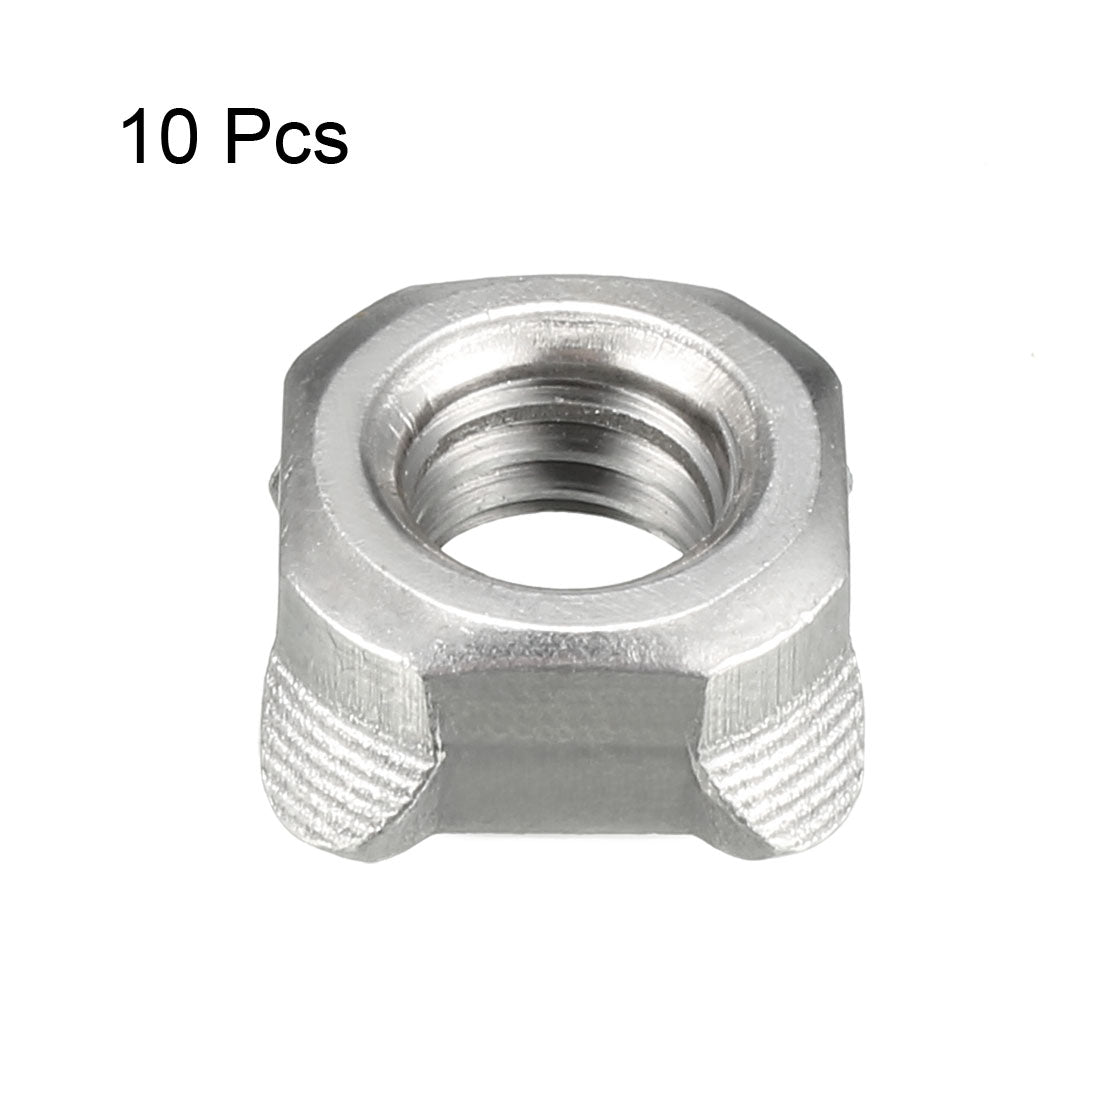 Uxcell Uxcell Weld Nuts,M8 Square UNC Carbon Steel Machine Screw Silver 10Pcs